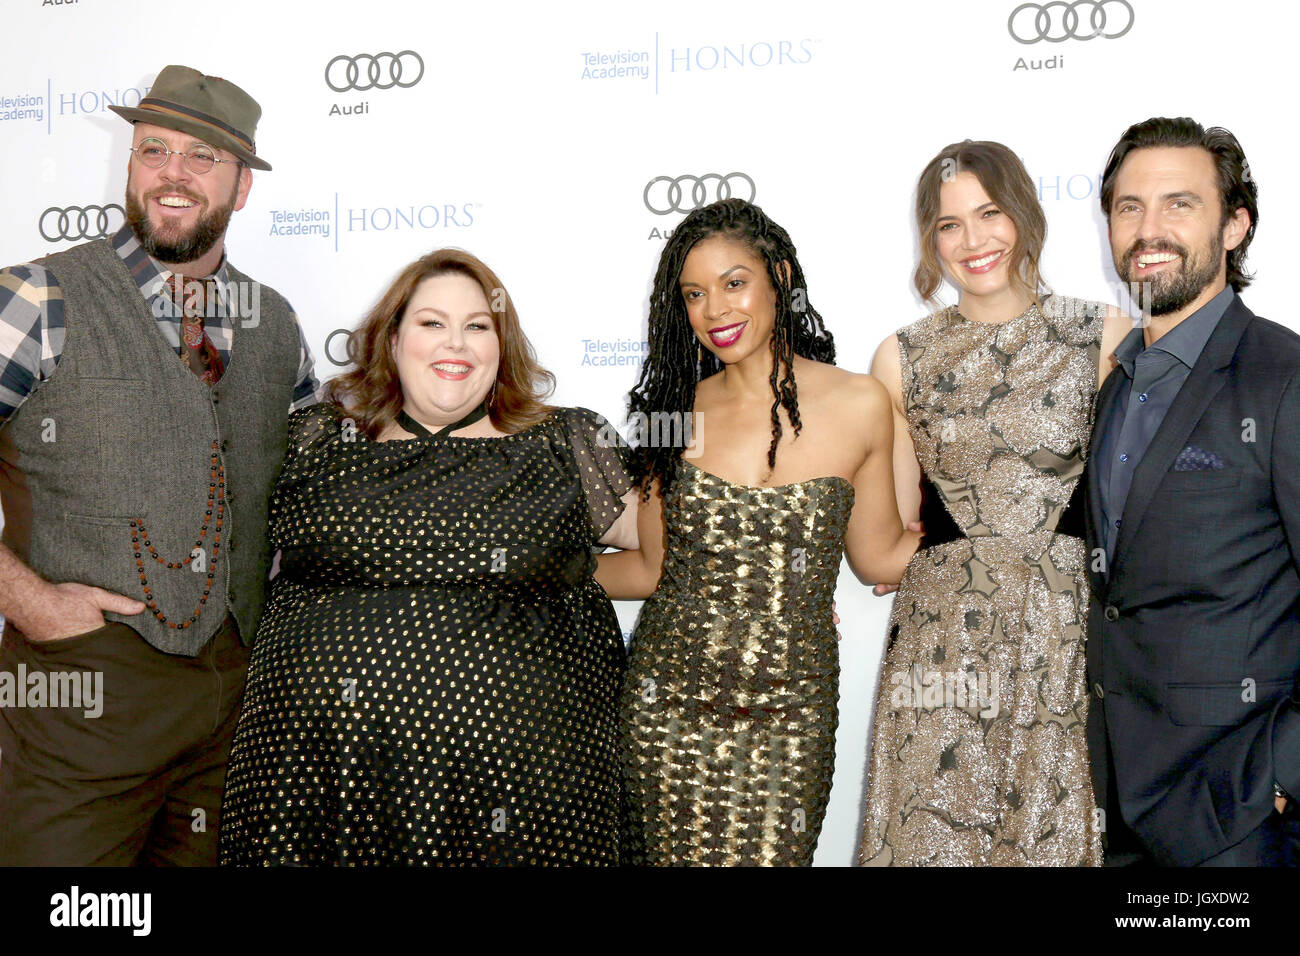 10th Annual Television Academy Honors at the Montage Hotel - Arrivals  Featuring: Chris Sullivan, Chrissy Metz, Susan Kelechi Watson, Mandy Moore, Milo Ventimiglia Where: Beverly Hills, California, United States When: 08 Jun 2017 Credit: Nicky Nelson/WENN.com Stock Photo